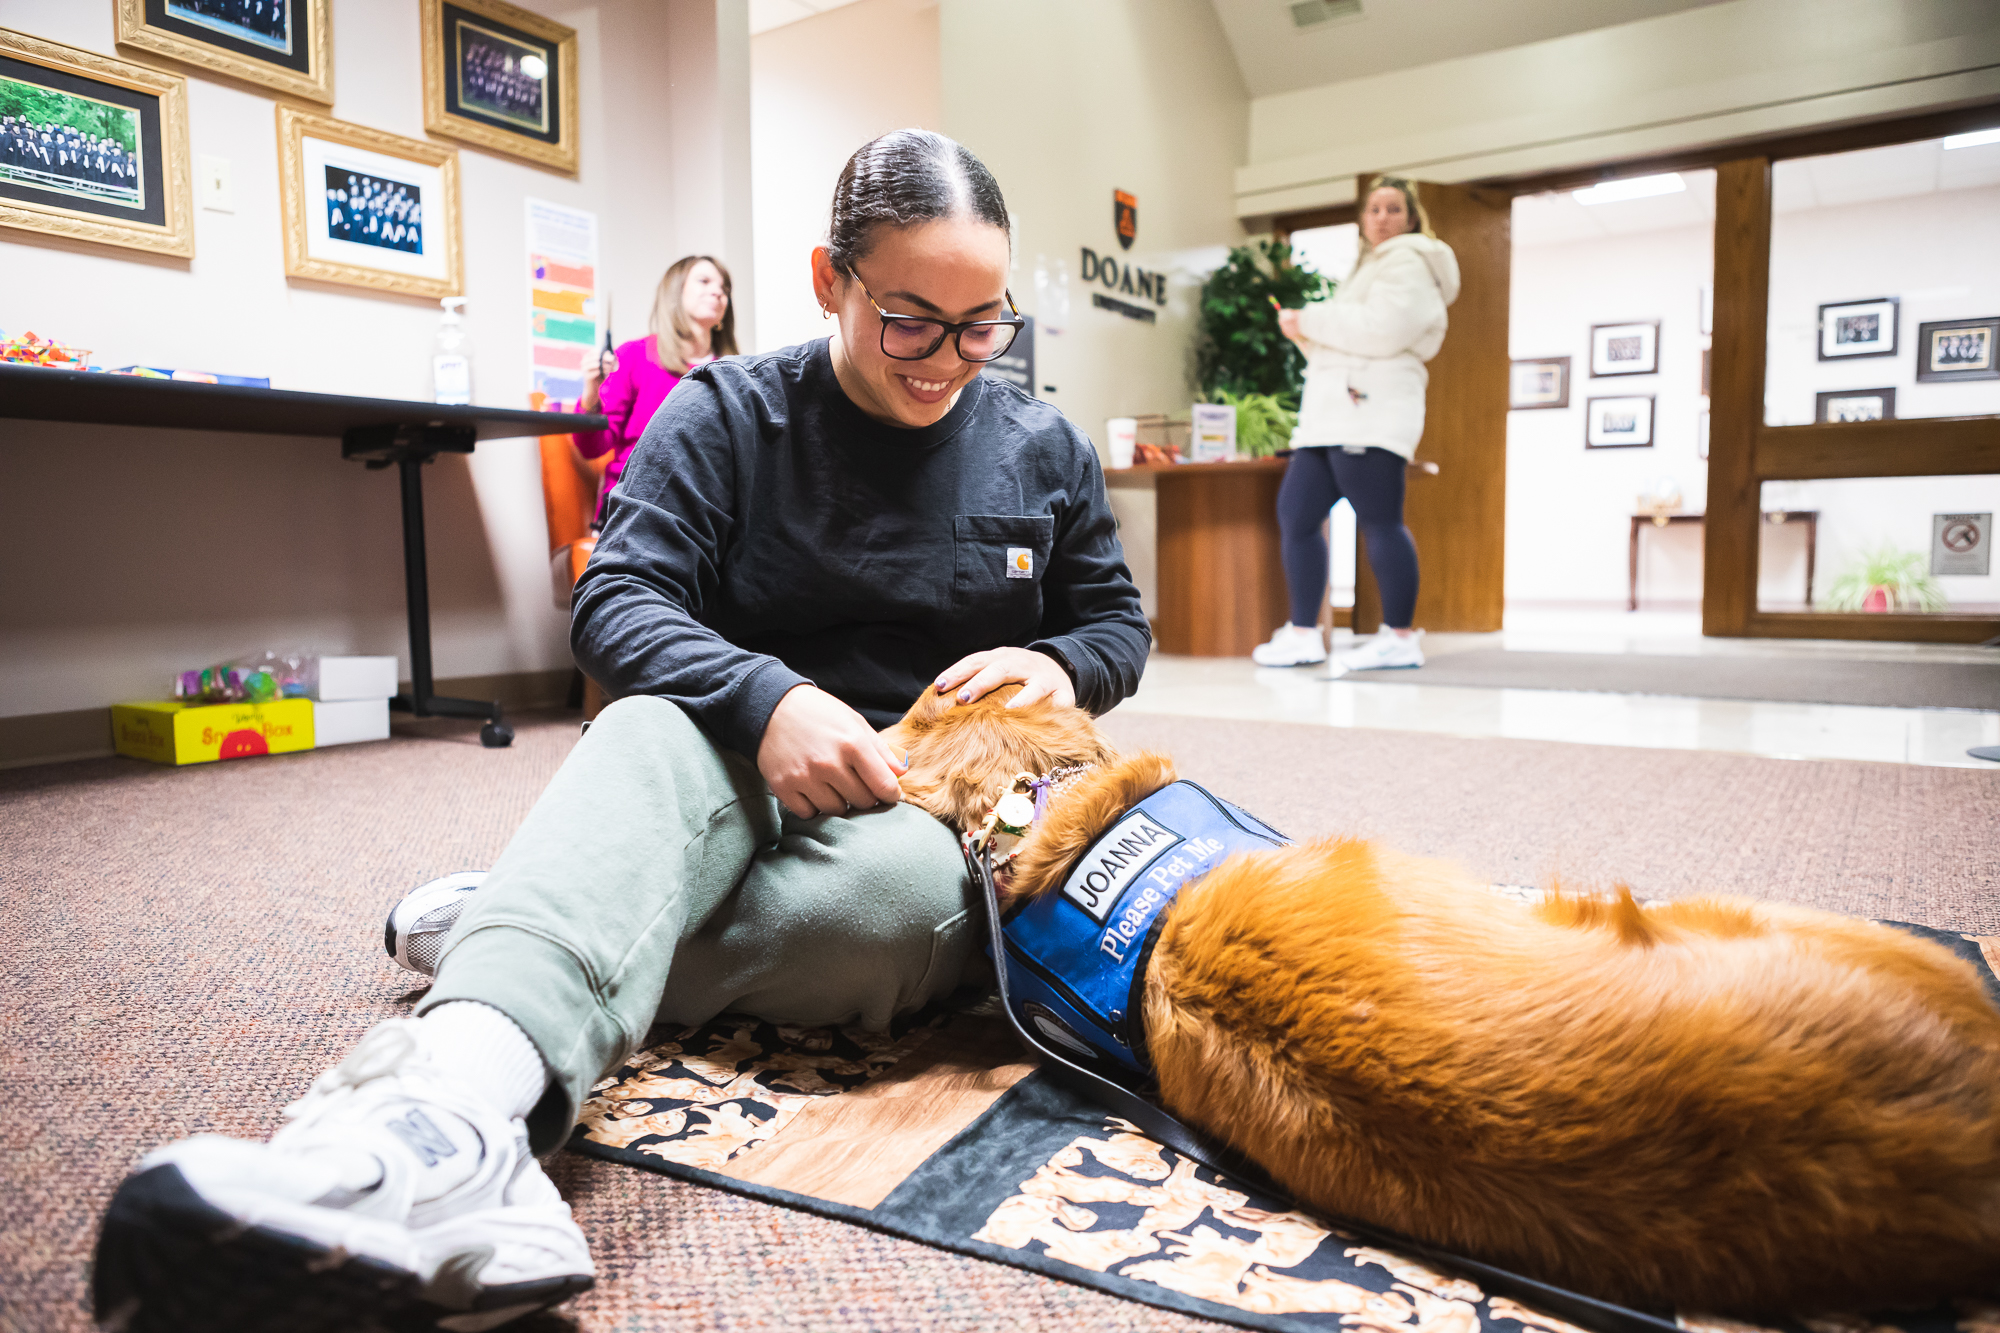 Master of Arts in Counseling student Ekianet Tamayo pets Joanna, a trained therapy dog, during a break between her classes in Lincoln.